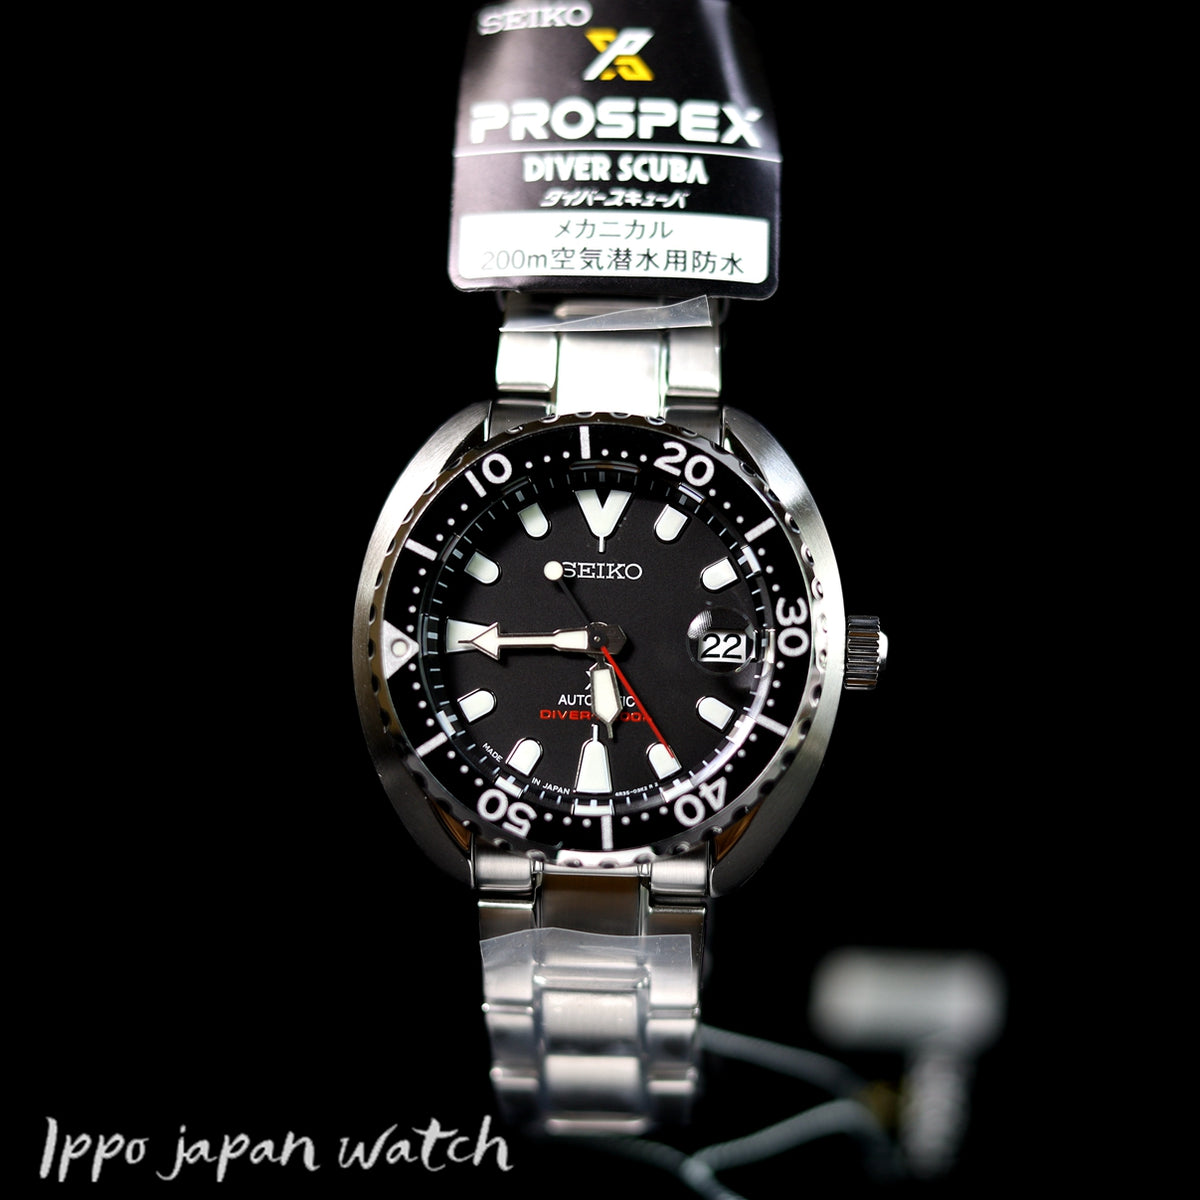 Seiko Prospex SBDY085 Diver's 200M Mechanical Watch - IPPO JAPAN WATCH 